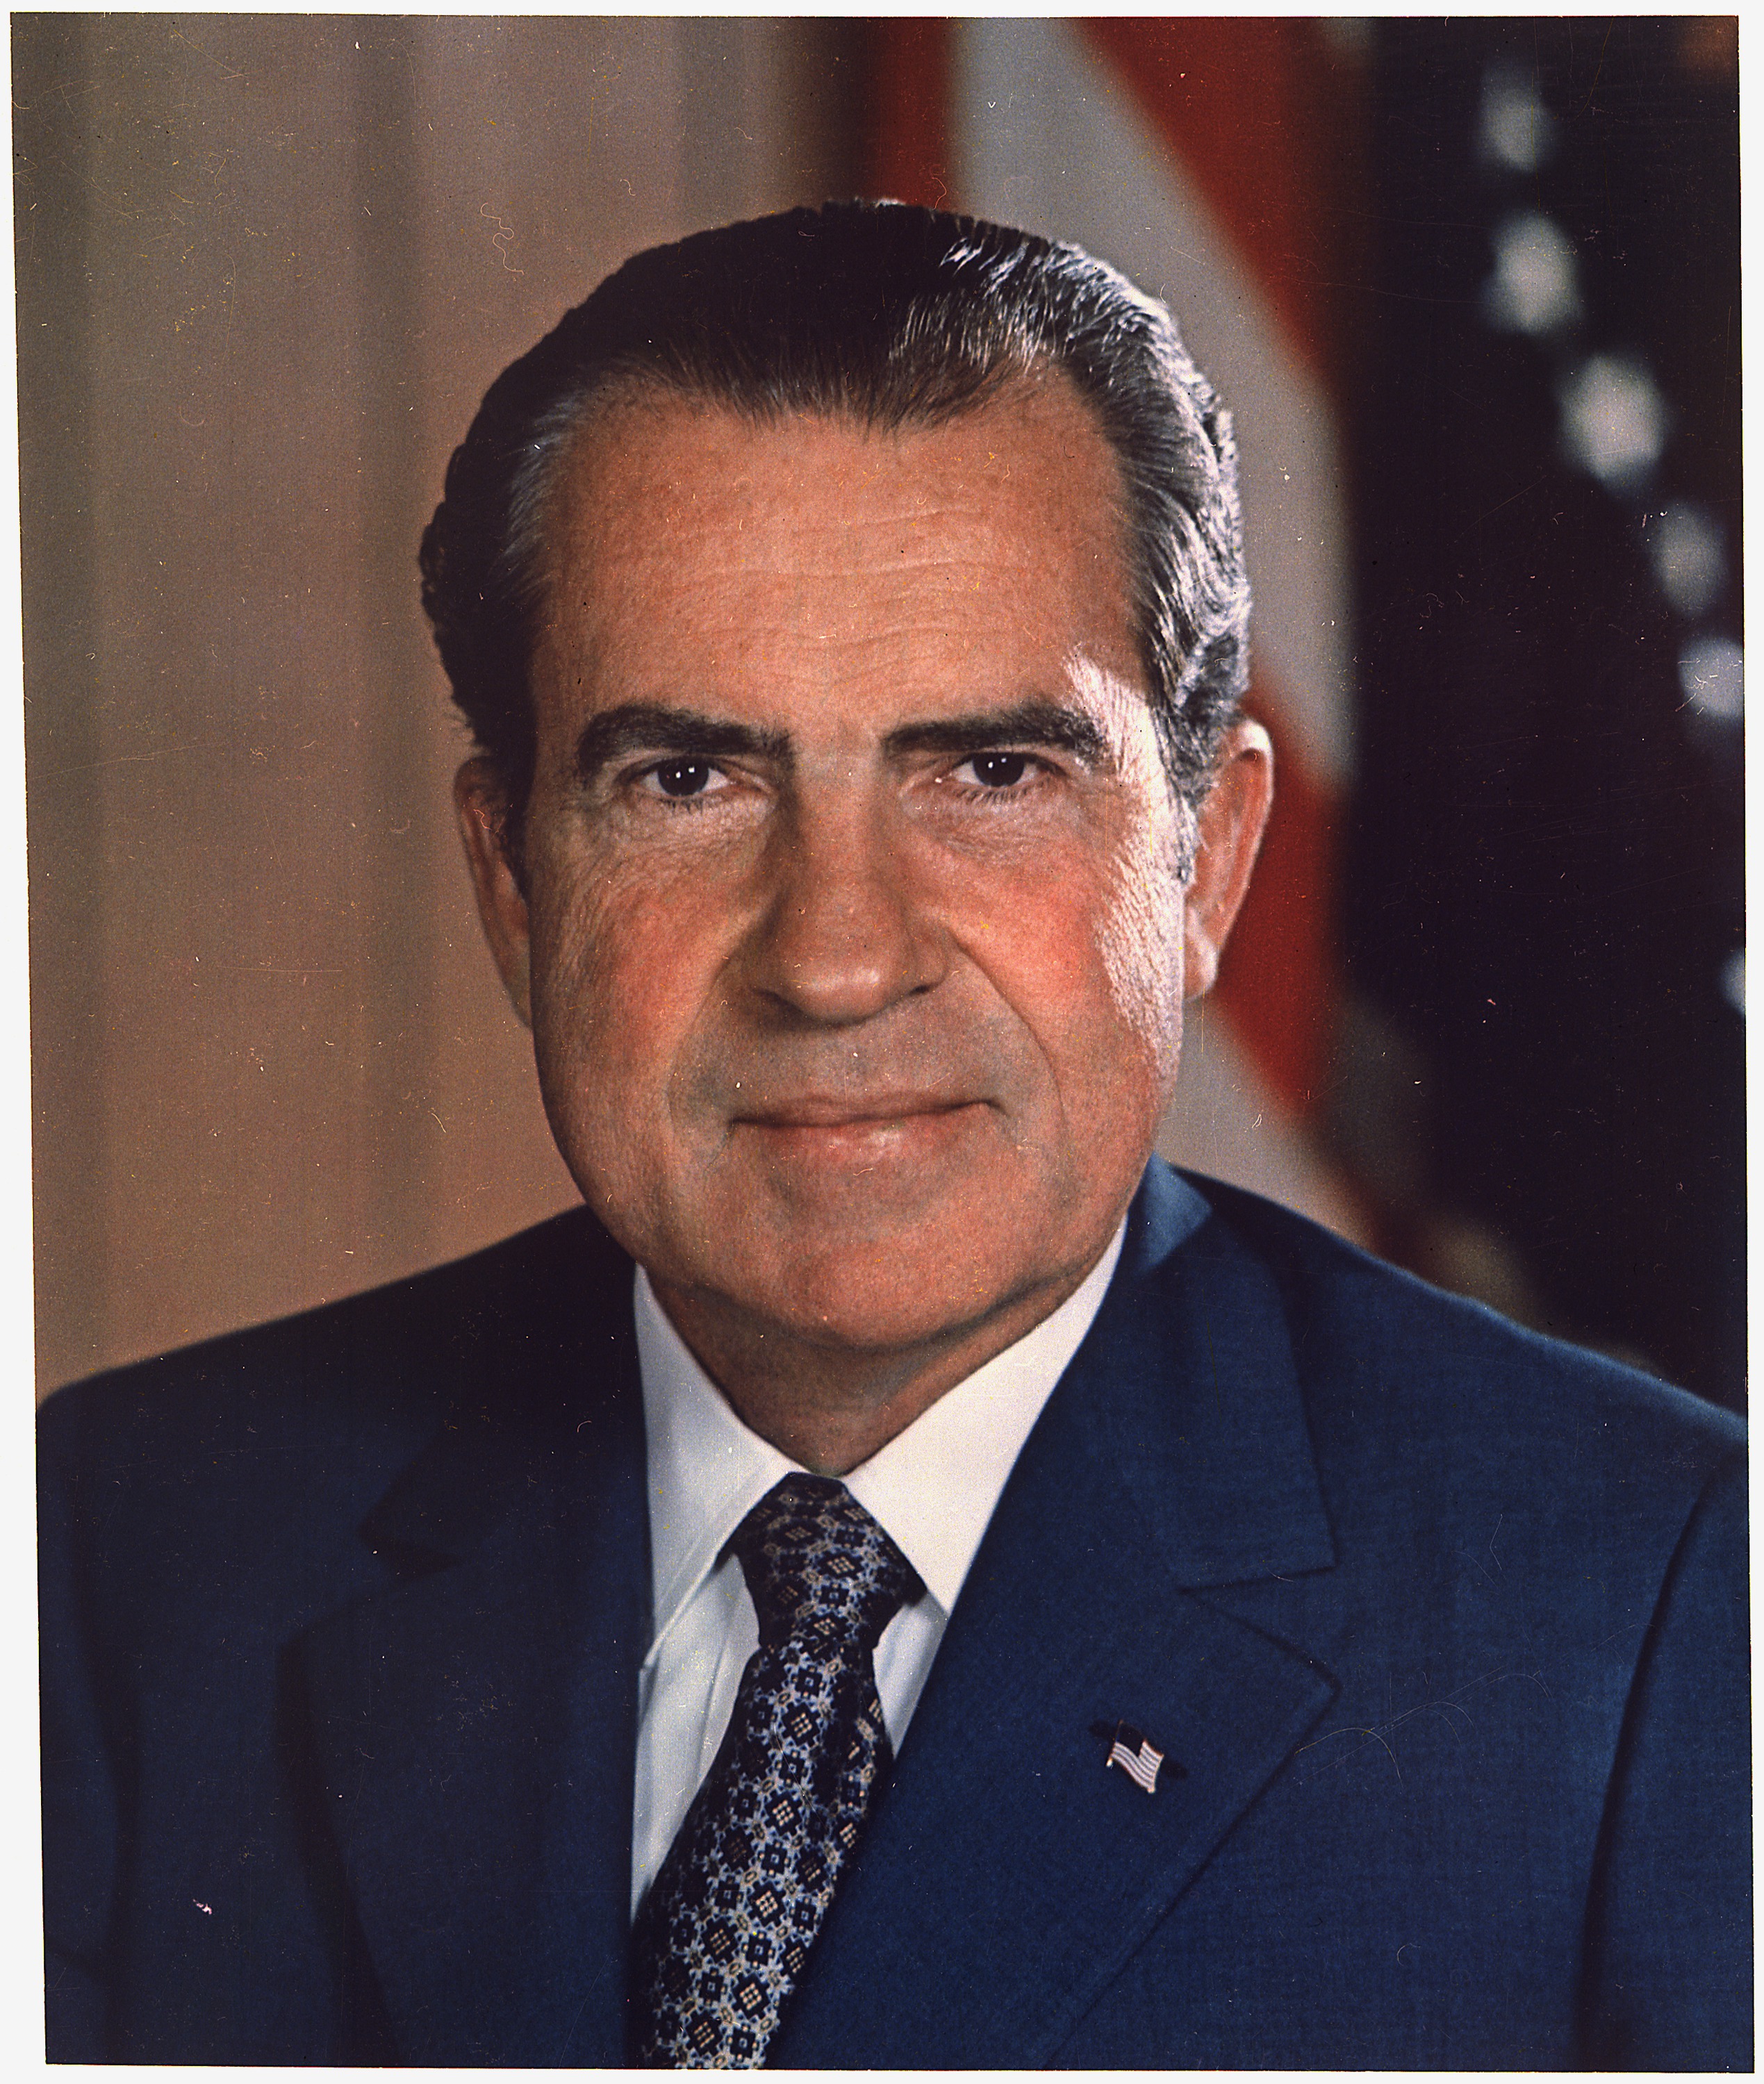 President Richard Nixon declares War on Cancer by introducing the National Cancer Act. He says the following during his 1971 State of the Union."I will also ask for an appropriation of an extra $100 million to launch an intensive campaign to find a cure for cancer, and I will ask later for whatever additional funds can effectively be used. The time has come in America when the same kind of concentrated effort that split the atom and took man to the moon should be turned toward conquering this dread disease. Let us make a total national commitment to achieve this goal."121Rettig, Richard. Cancer Crusade: The Story of the National Cancer Act of 1971. iUniverse, 2005                      2National Cancer Institute. The National Cancer Act of 1971. www.cancer.gov/aboutnci/national-cancer-act-1971/allpages      